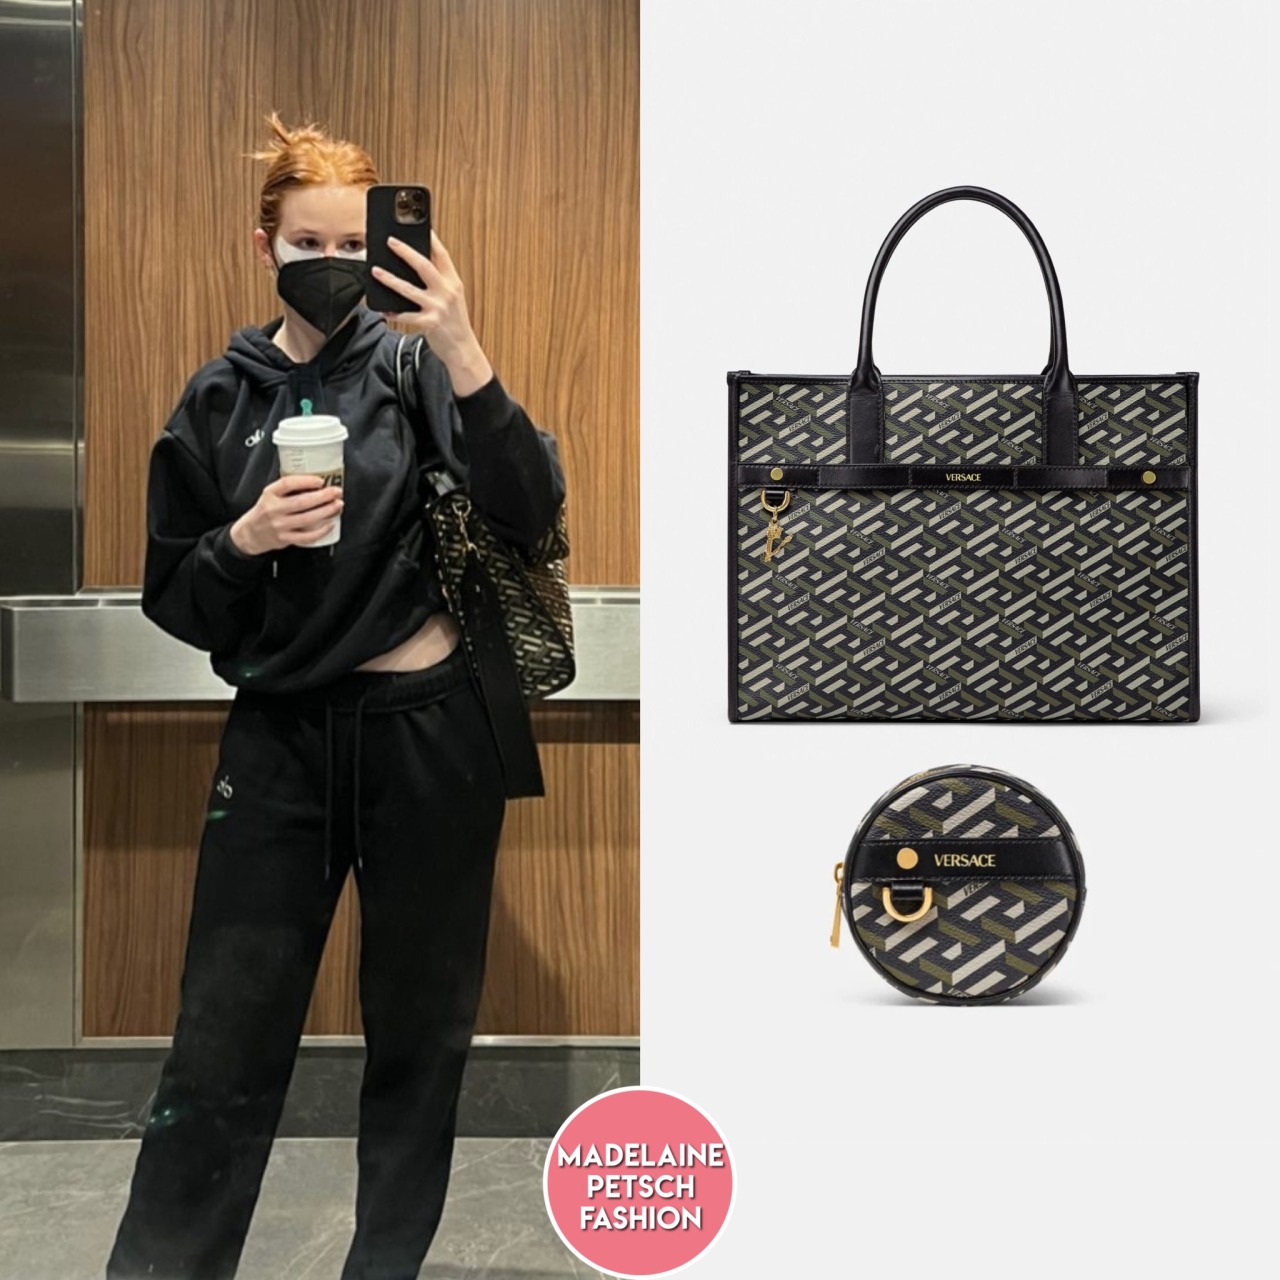 Madelaine Petsch Fashion — Instagram Post. Madelaine carried the Louis